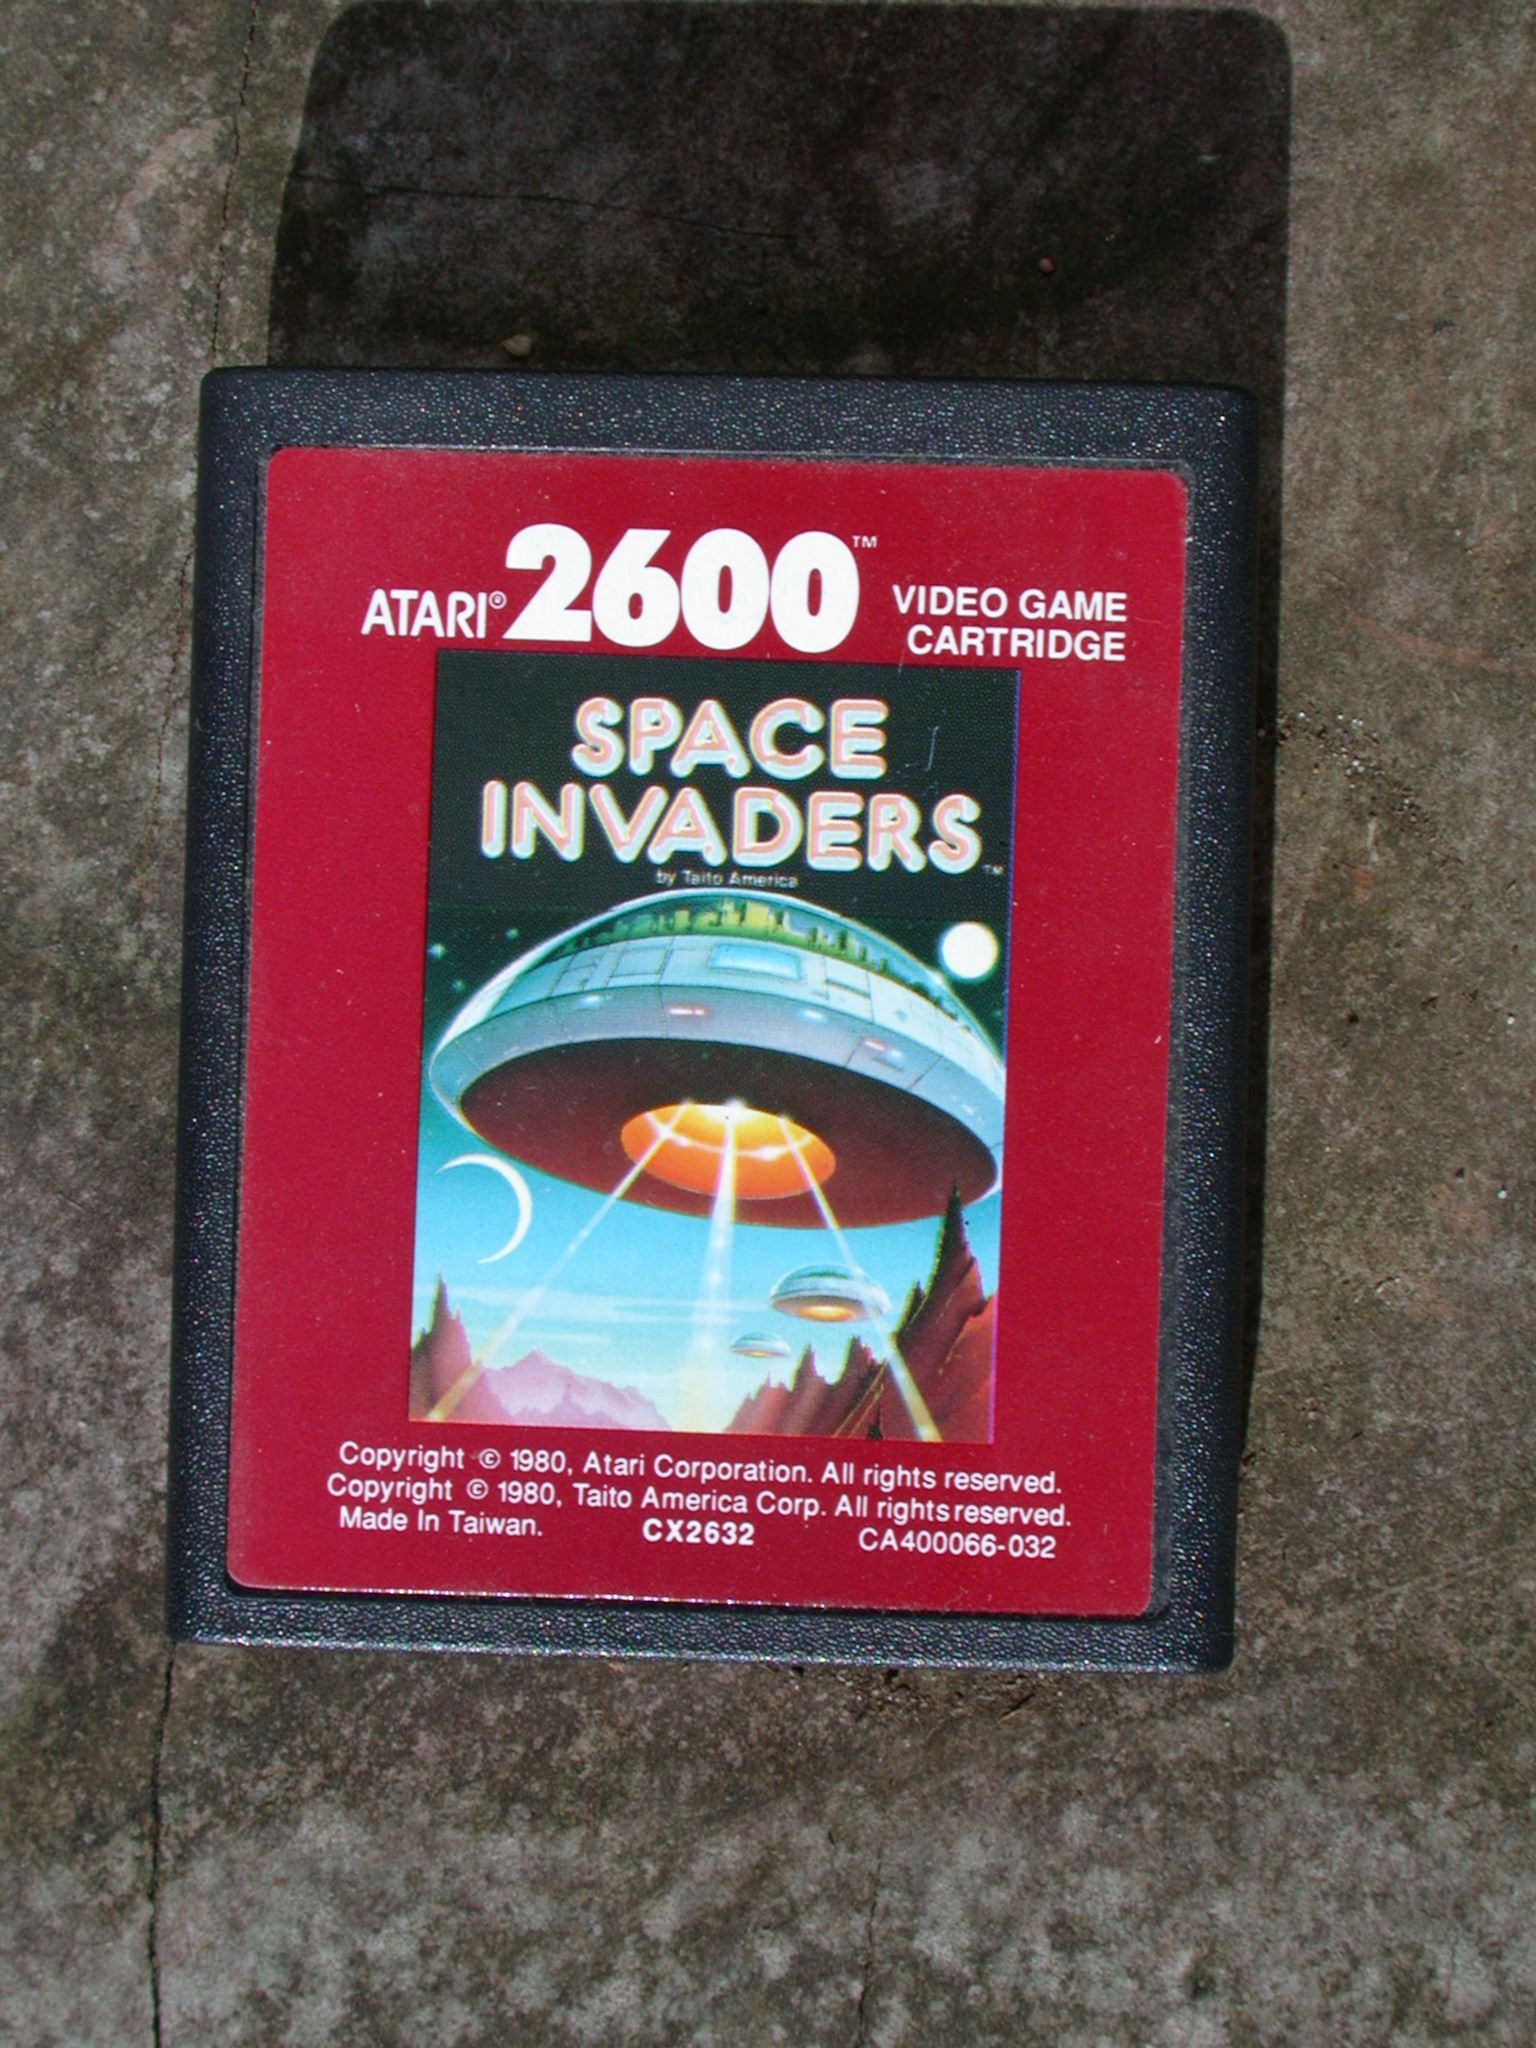 objects videogame computergame game games atari vintage spaceinvaders invaders space cartridge